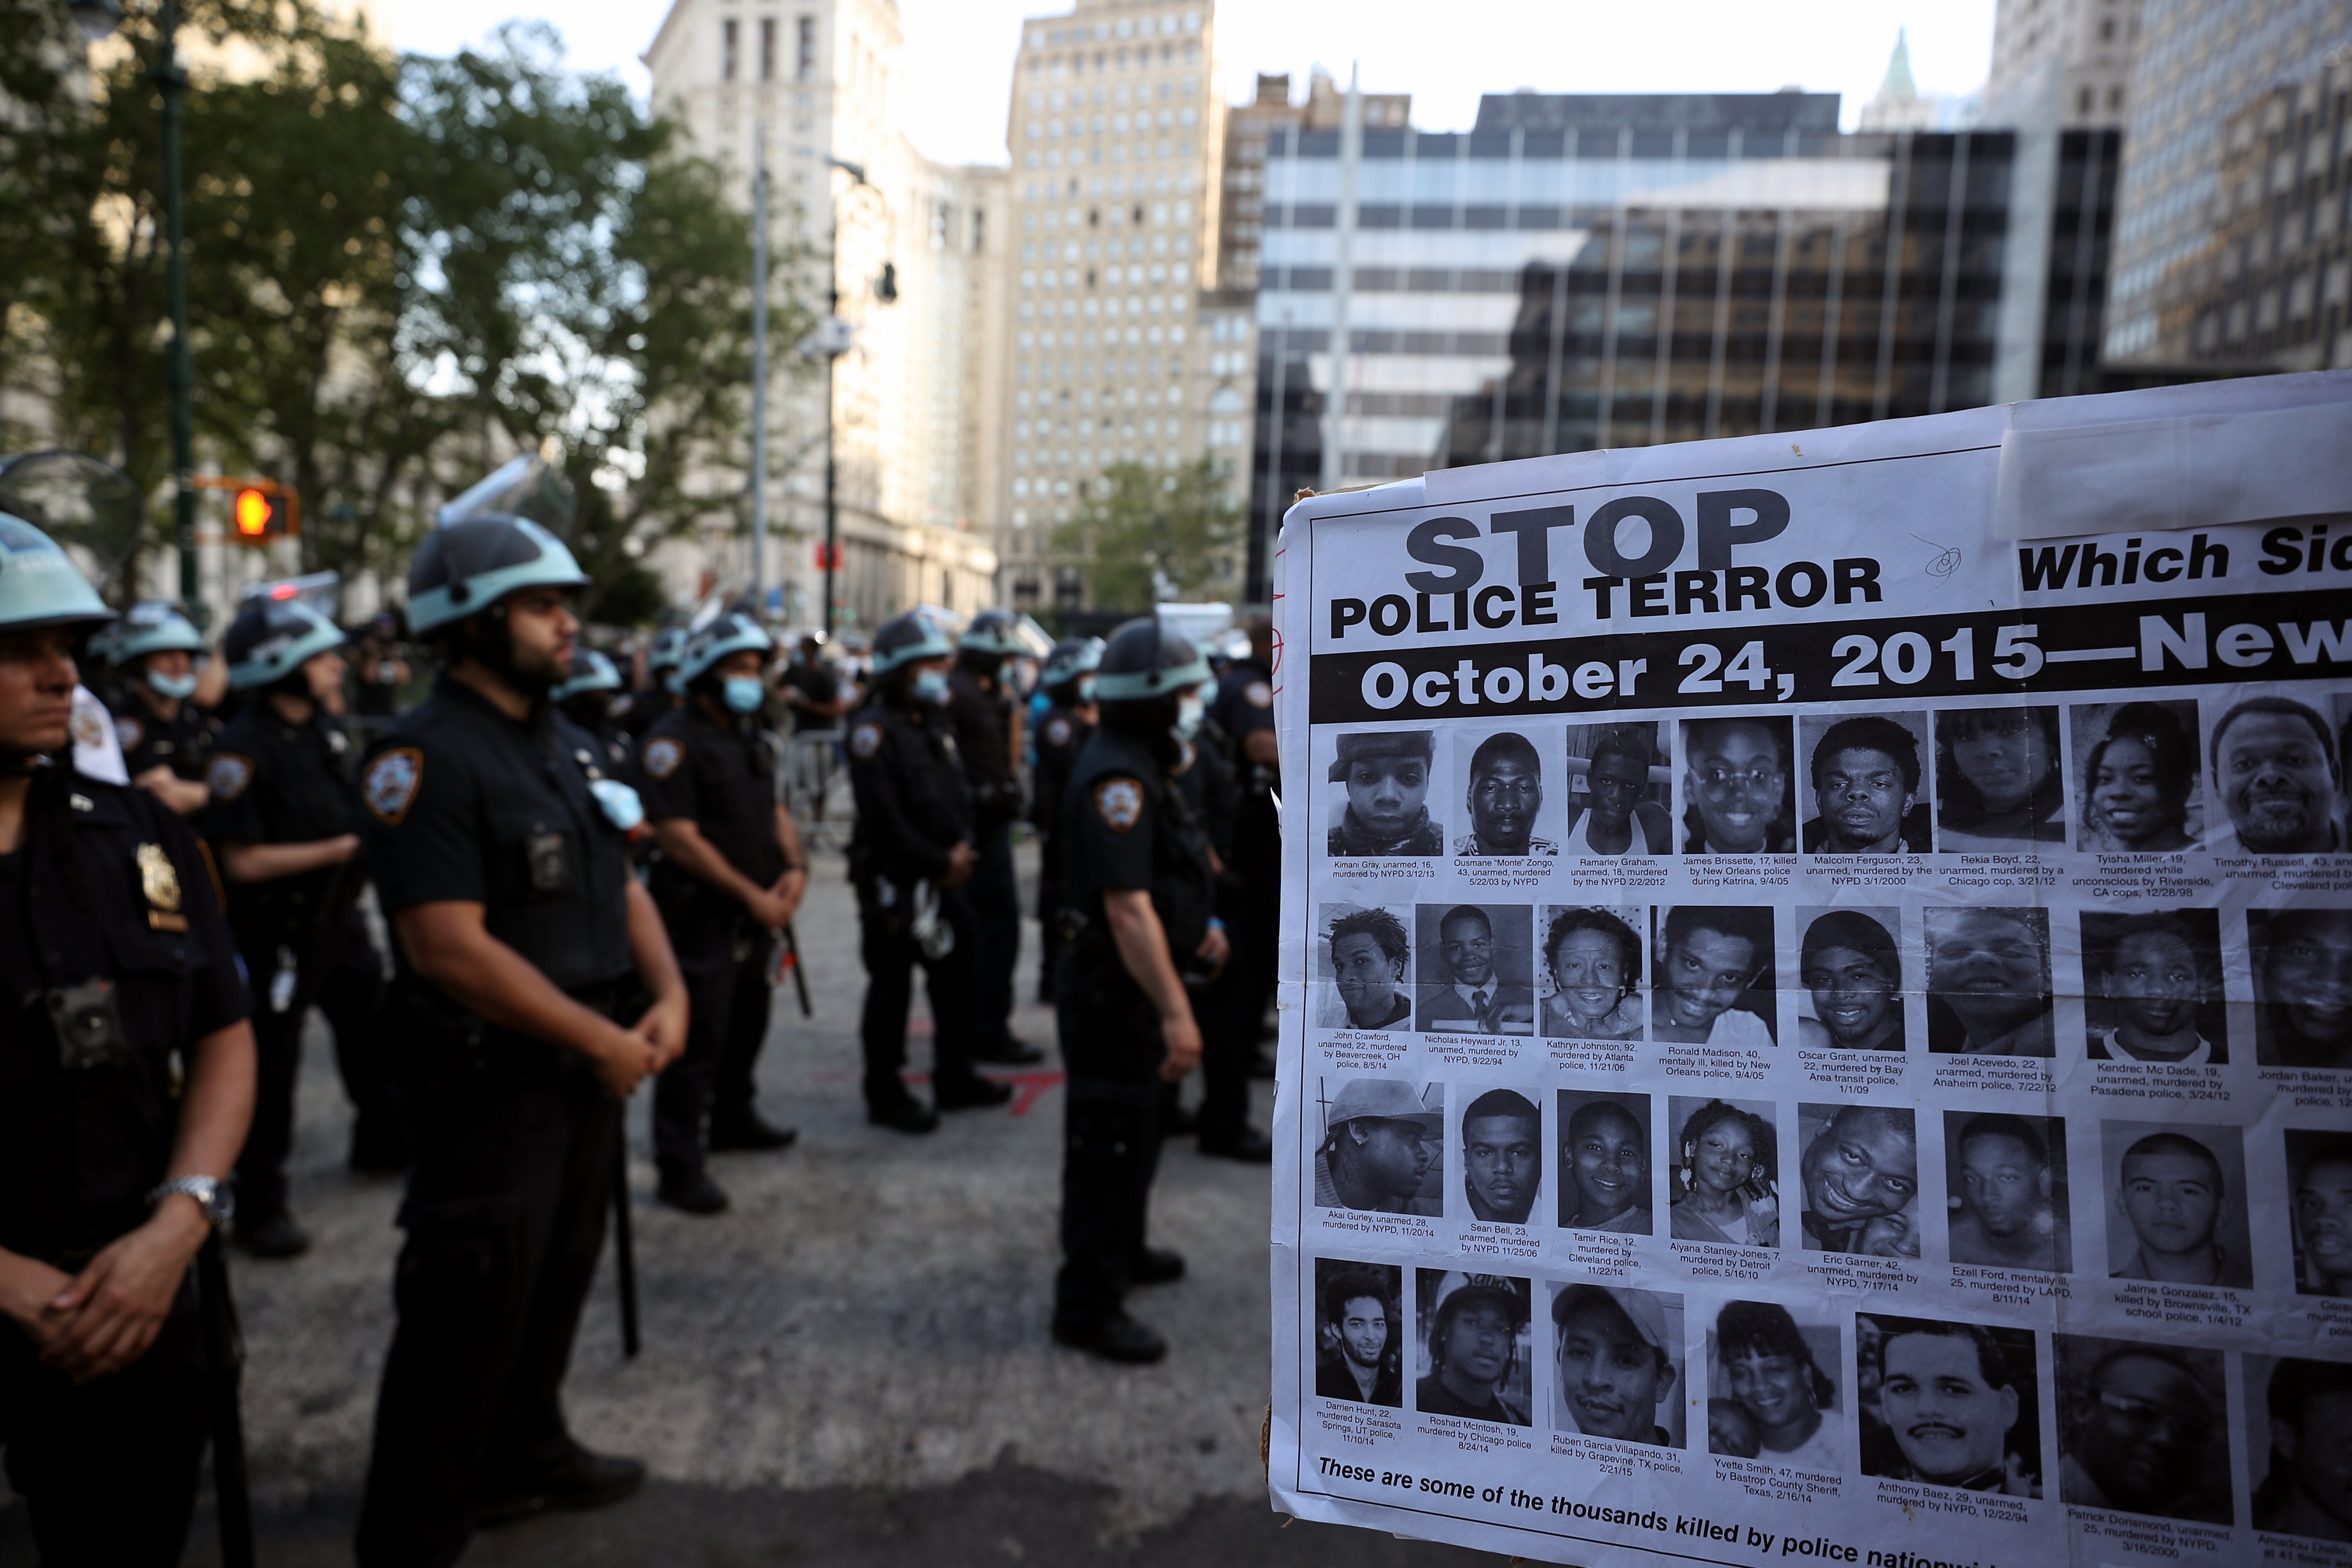 Police at a protest demanding an end to racism and police brutality on June 4, 2020 in New York. (Tayfun Coskun—Anadolu Agency/Getty Images)